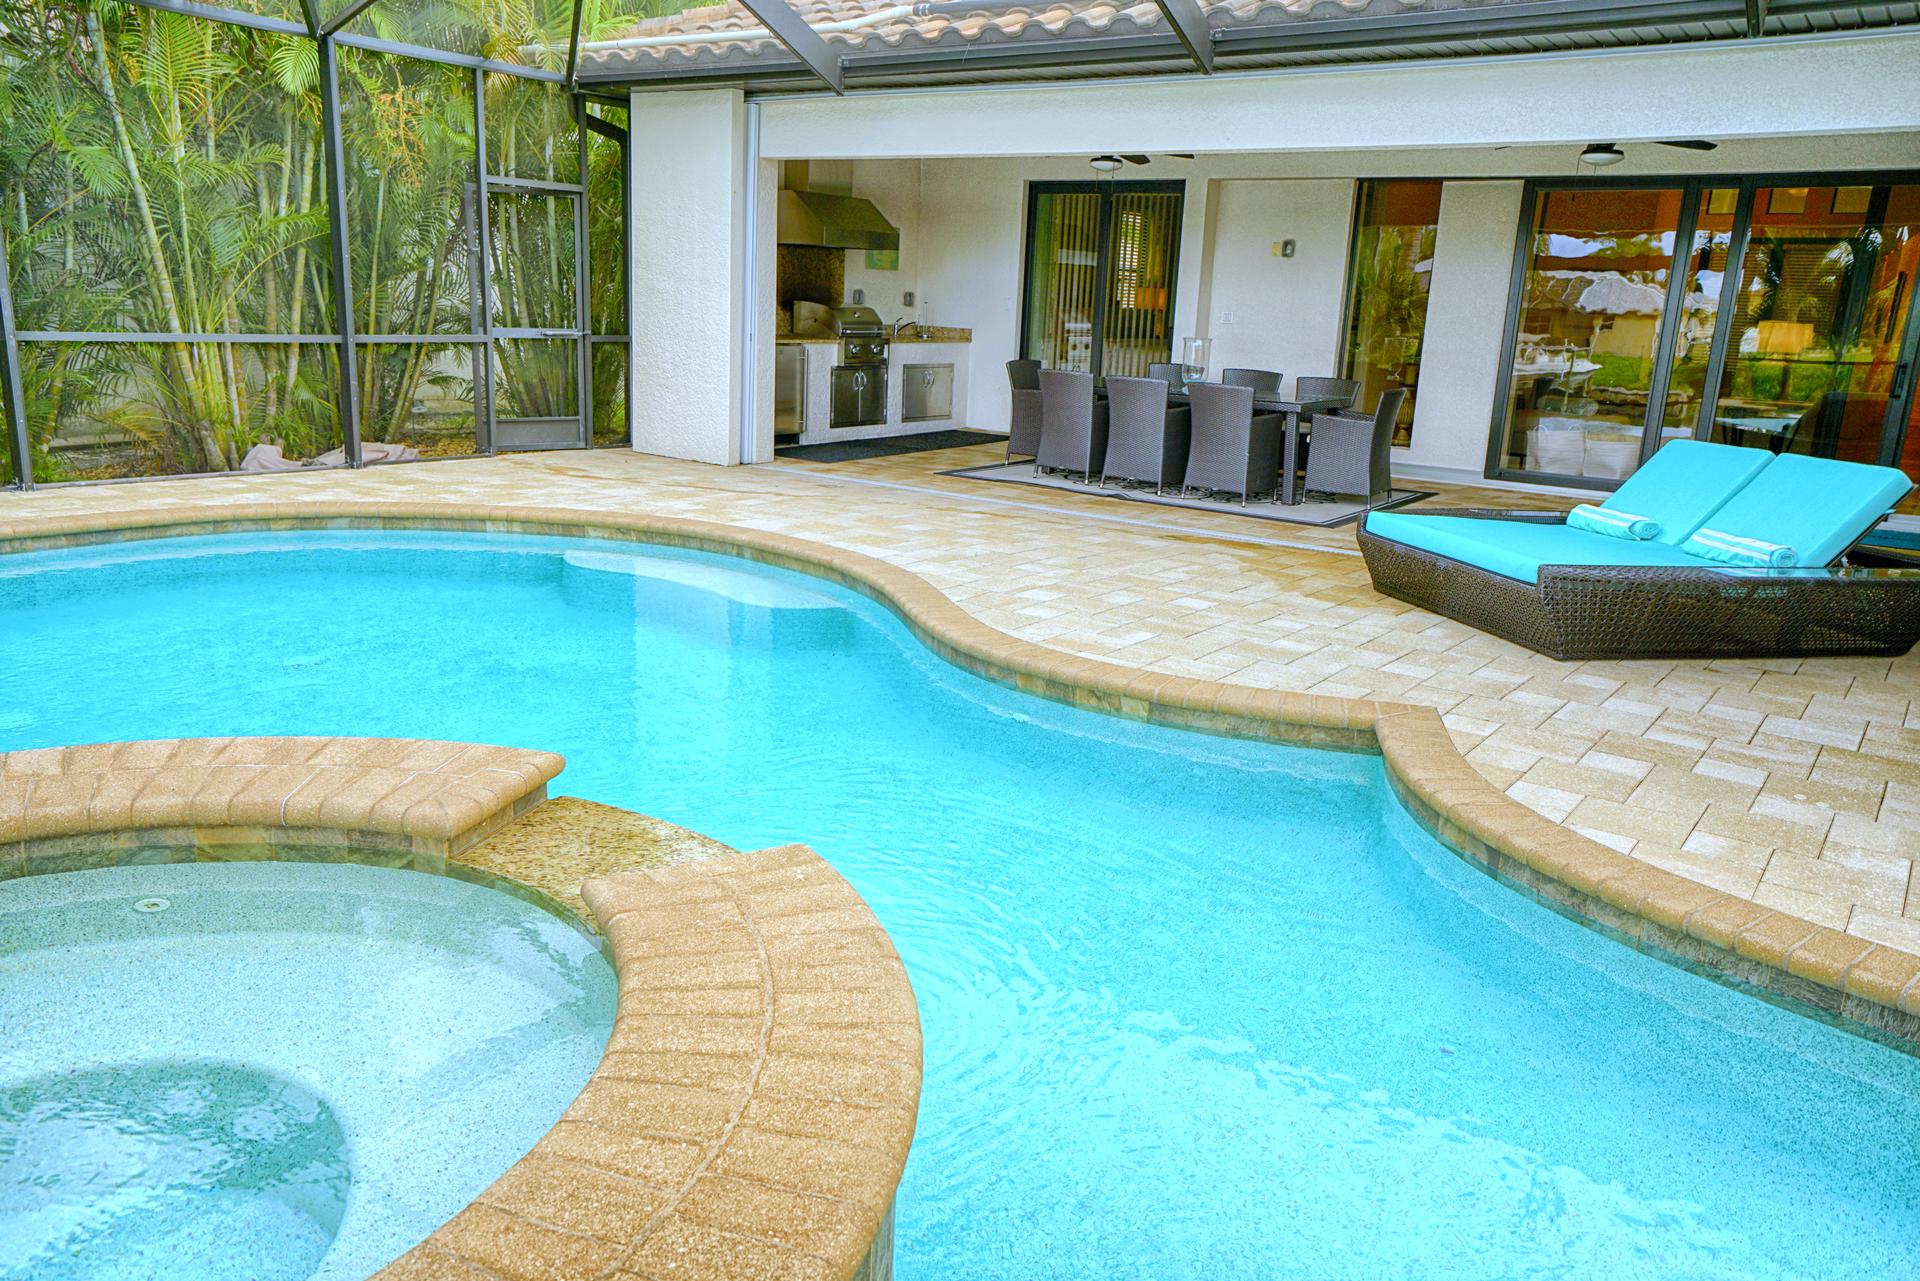 Pool Area in the rental home